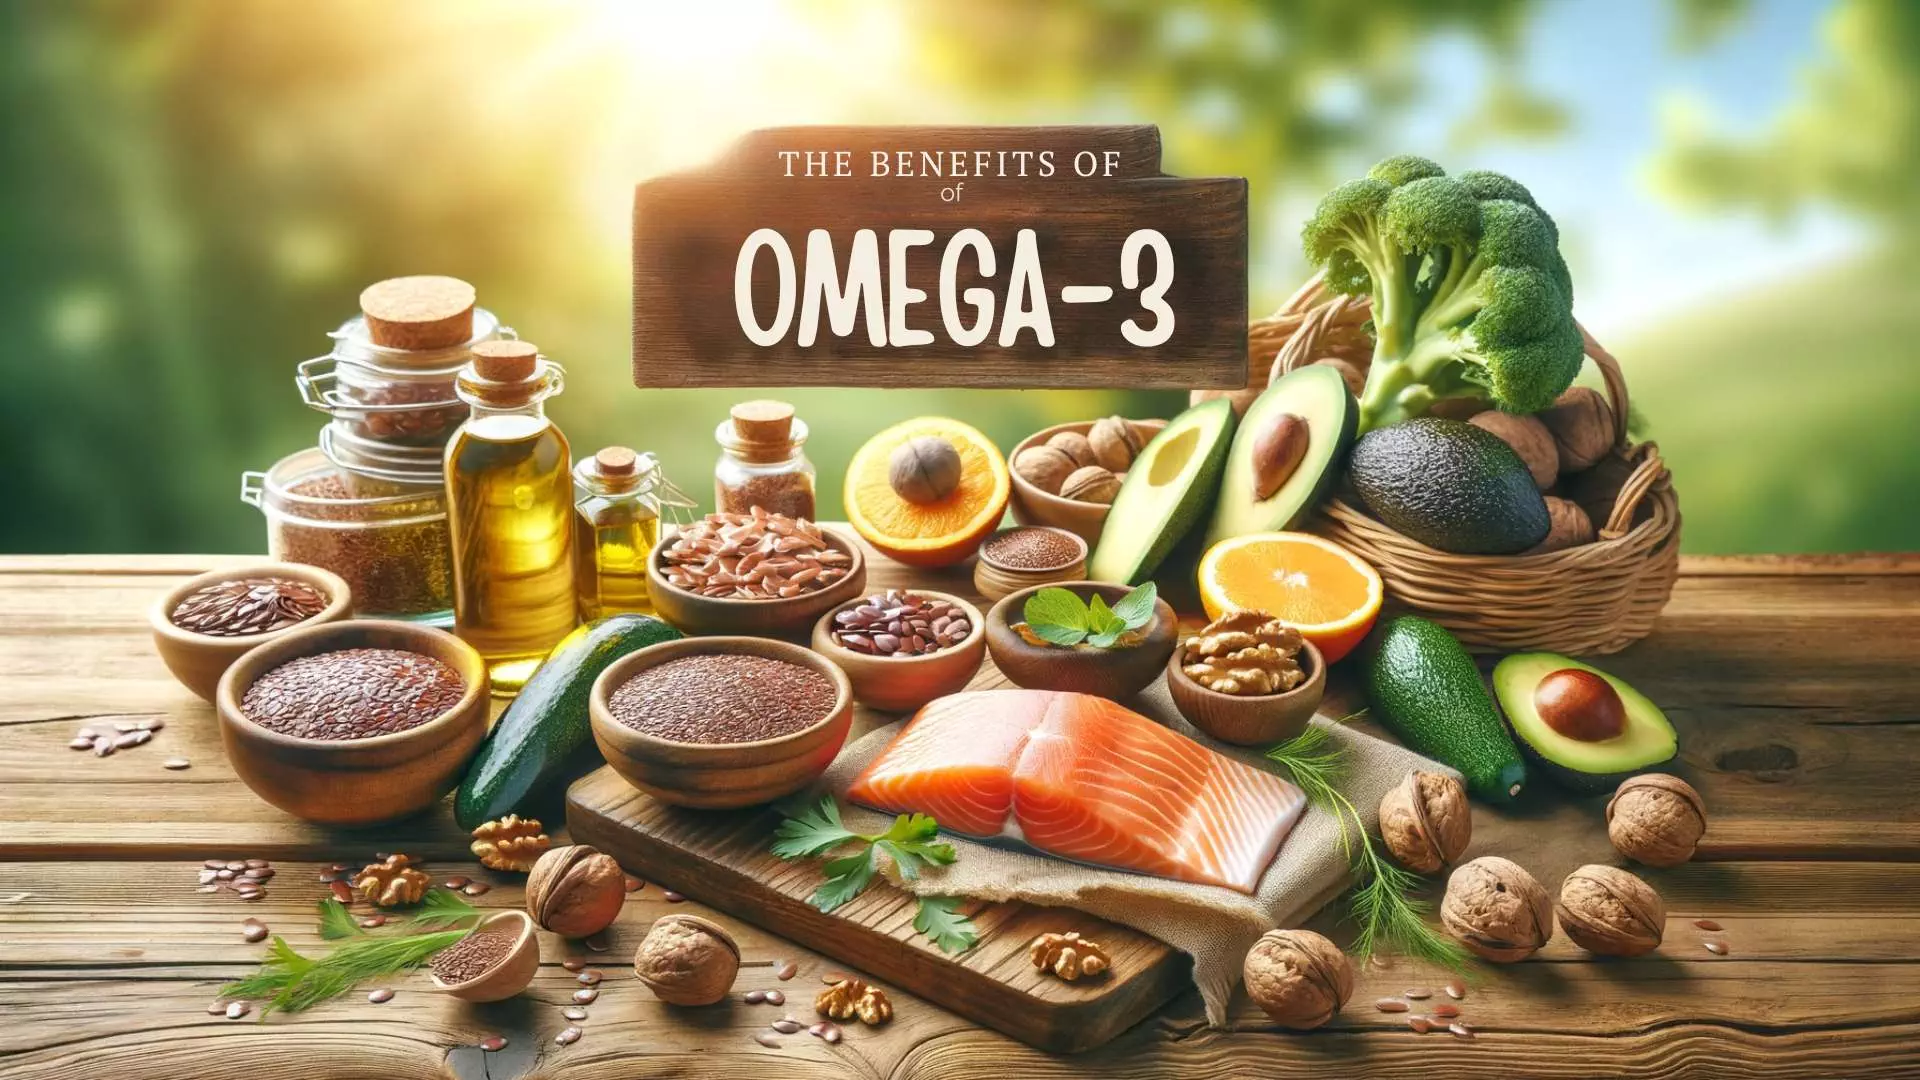 THE BENEFITS OF of OMEGA 3 featured blog post image